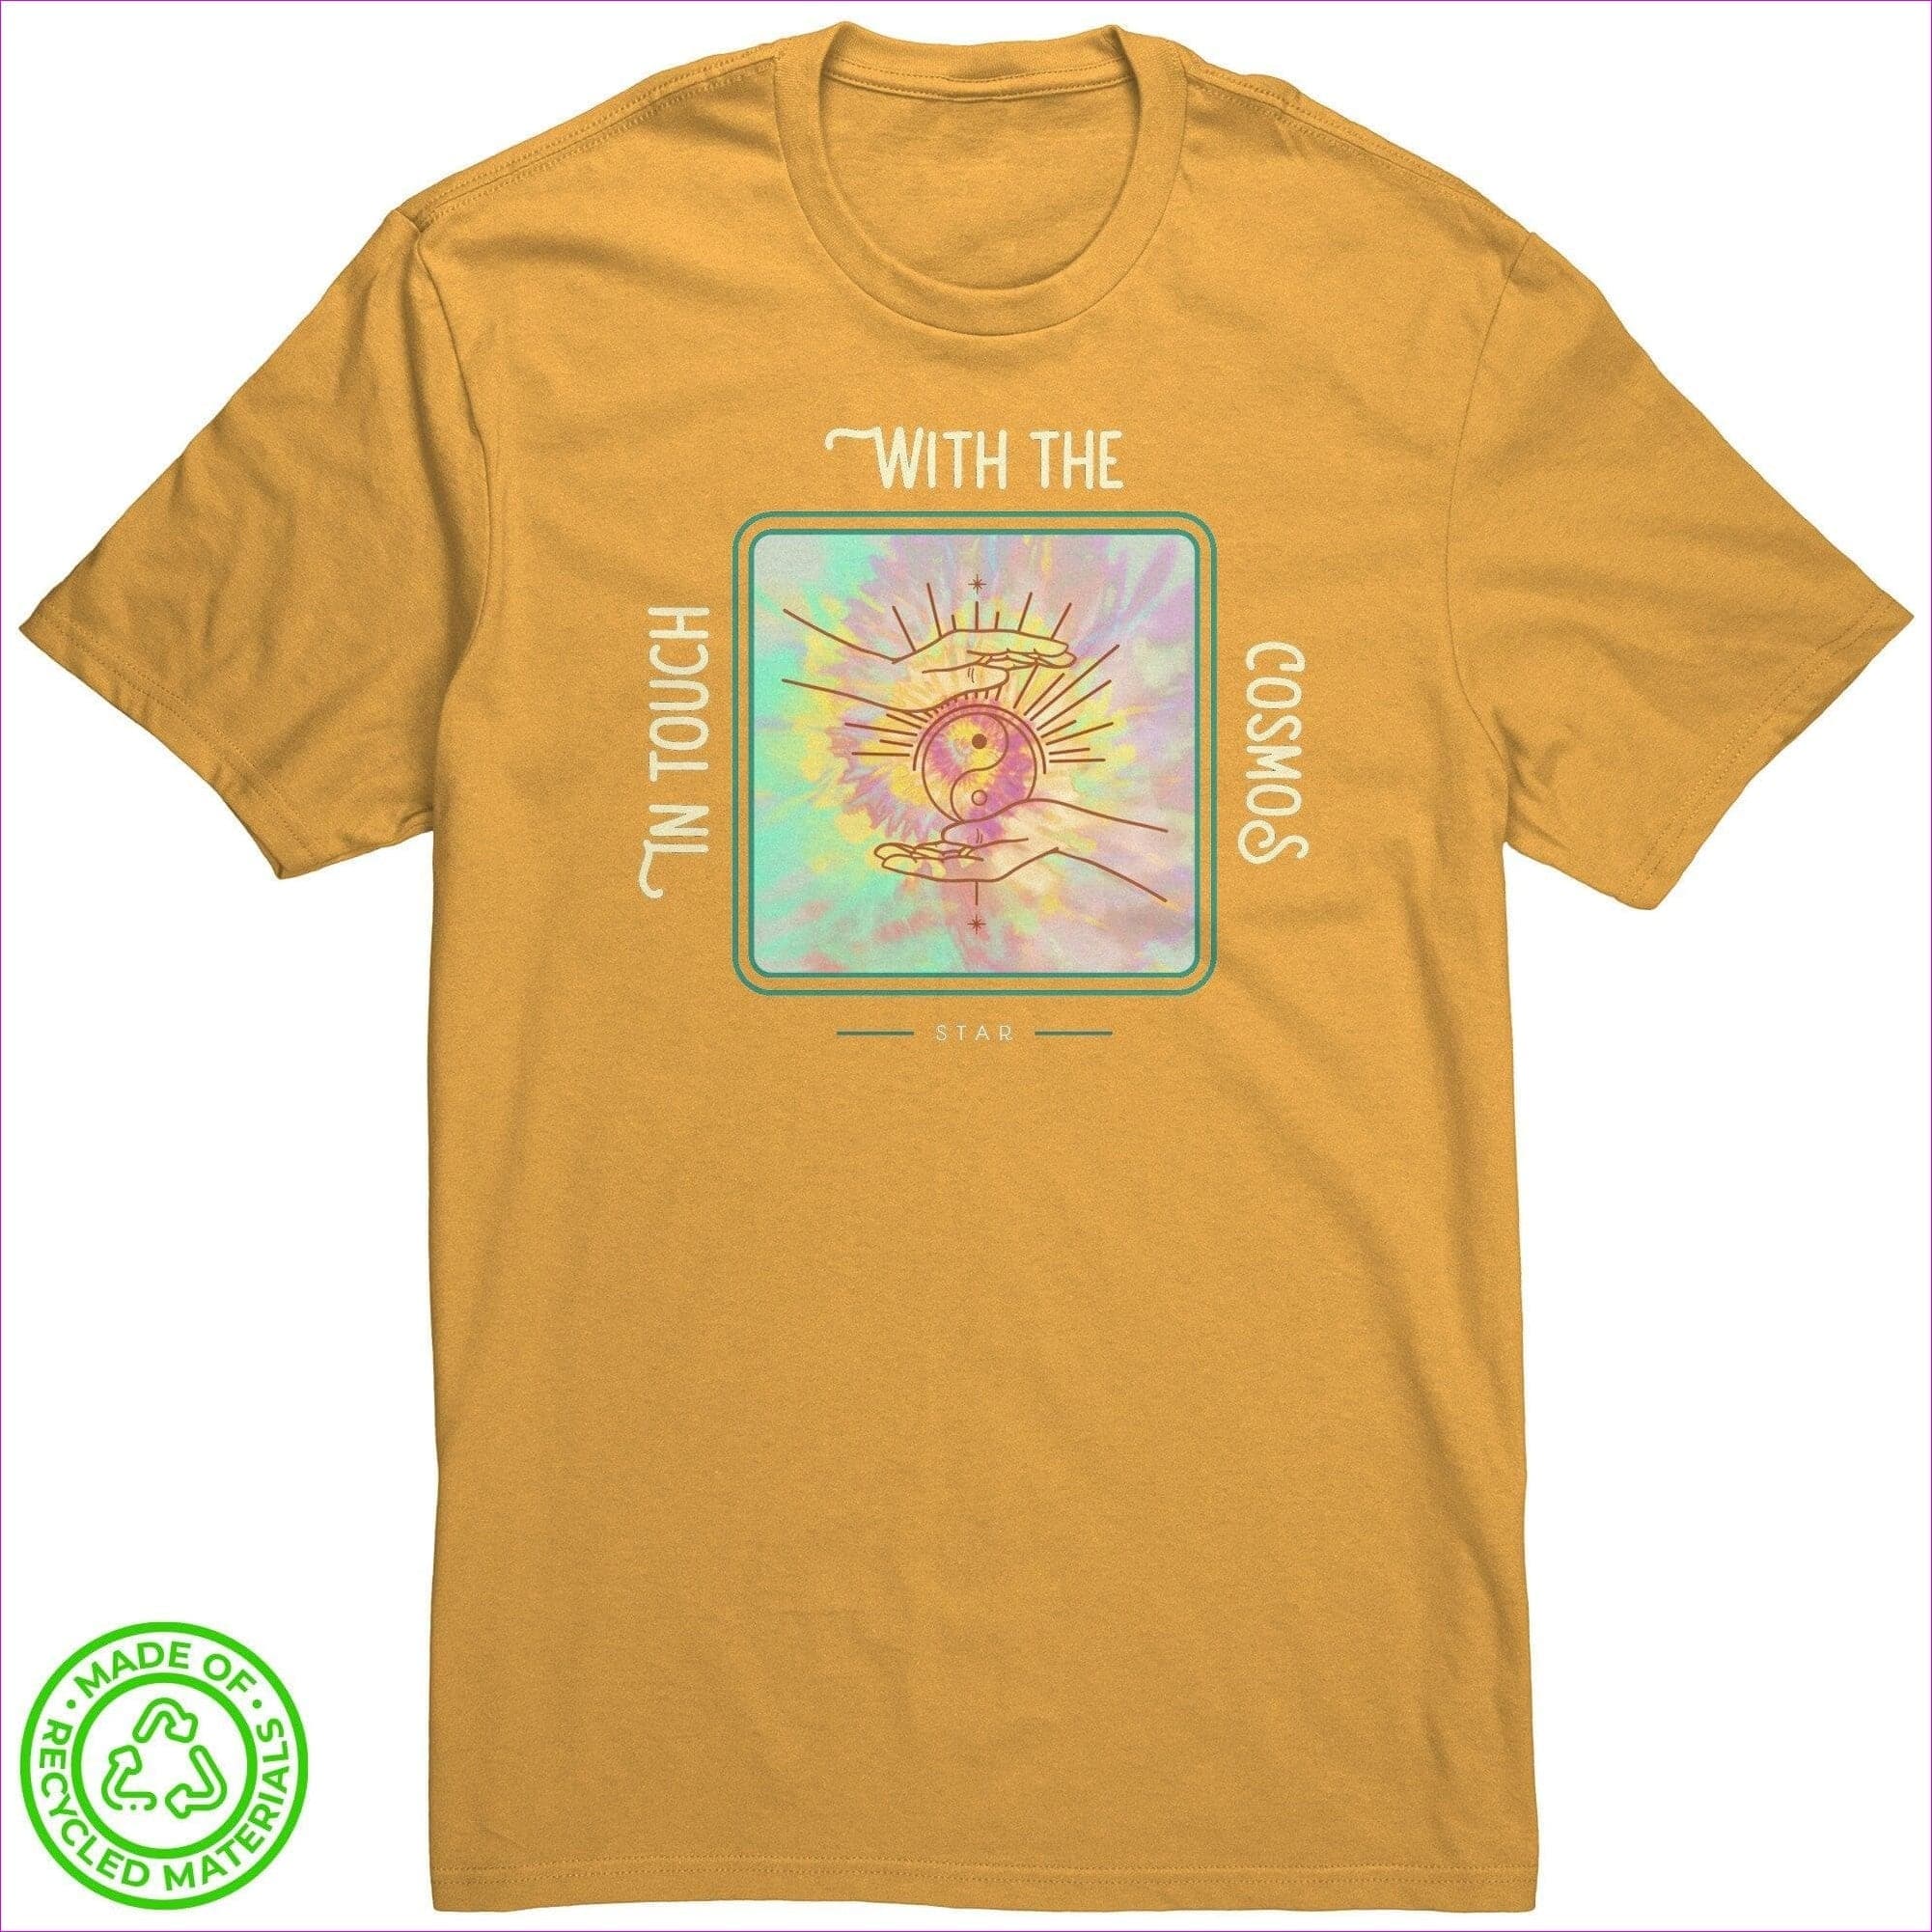 Maize Yellow In Touch Recycled Fabric Unisex Tee - Unisex T-Shirt at TFC&H Co.